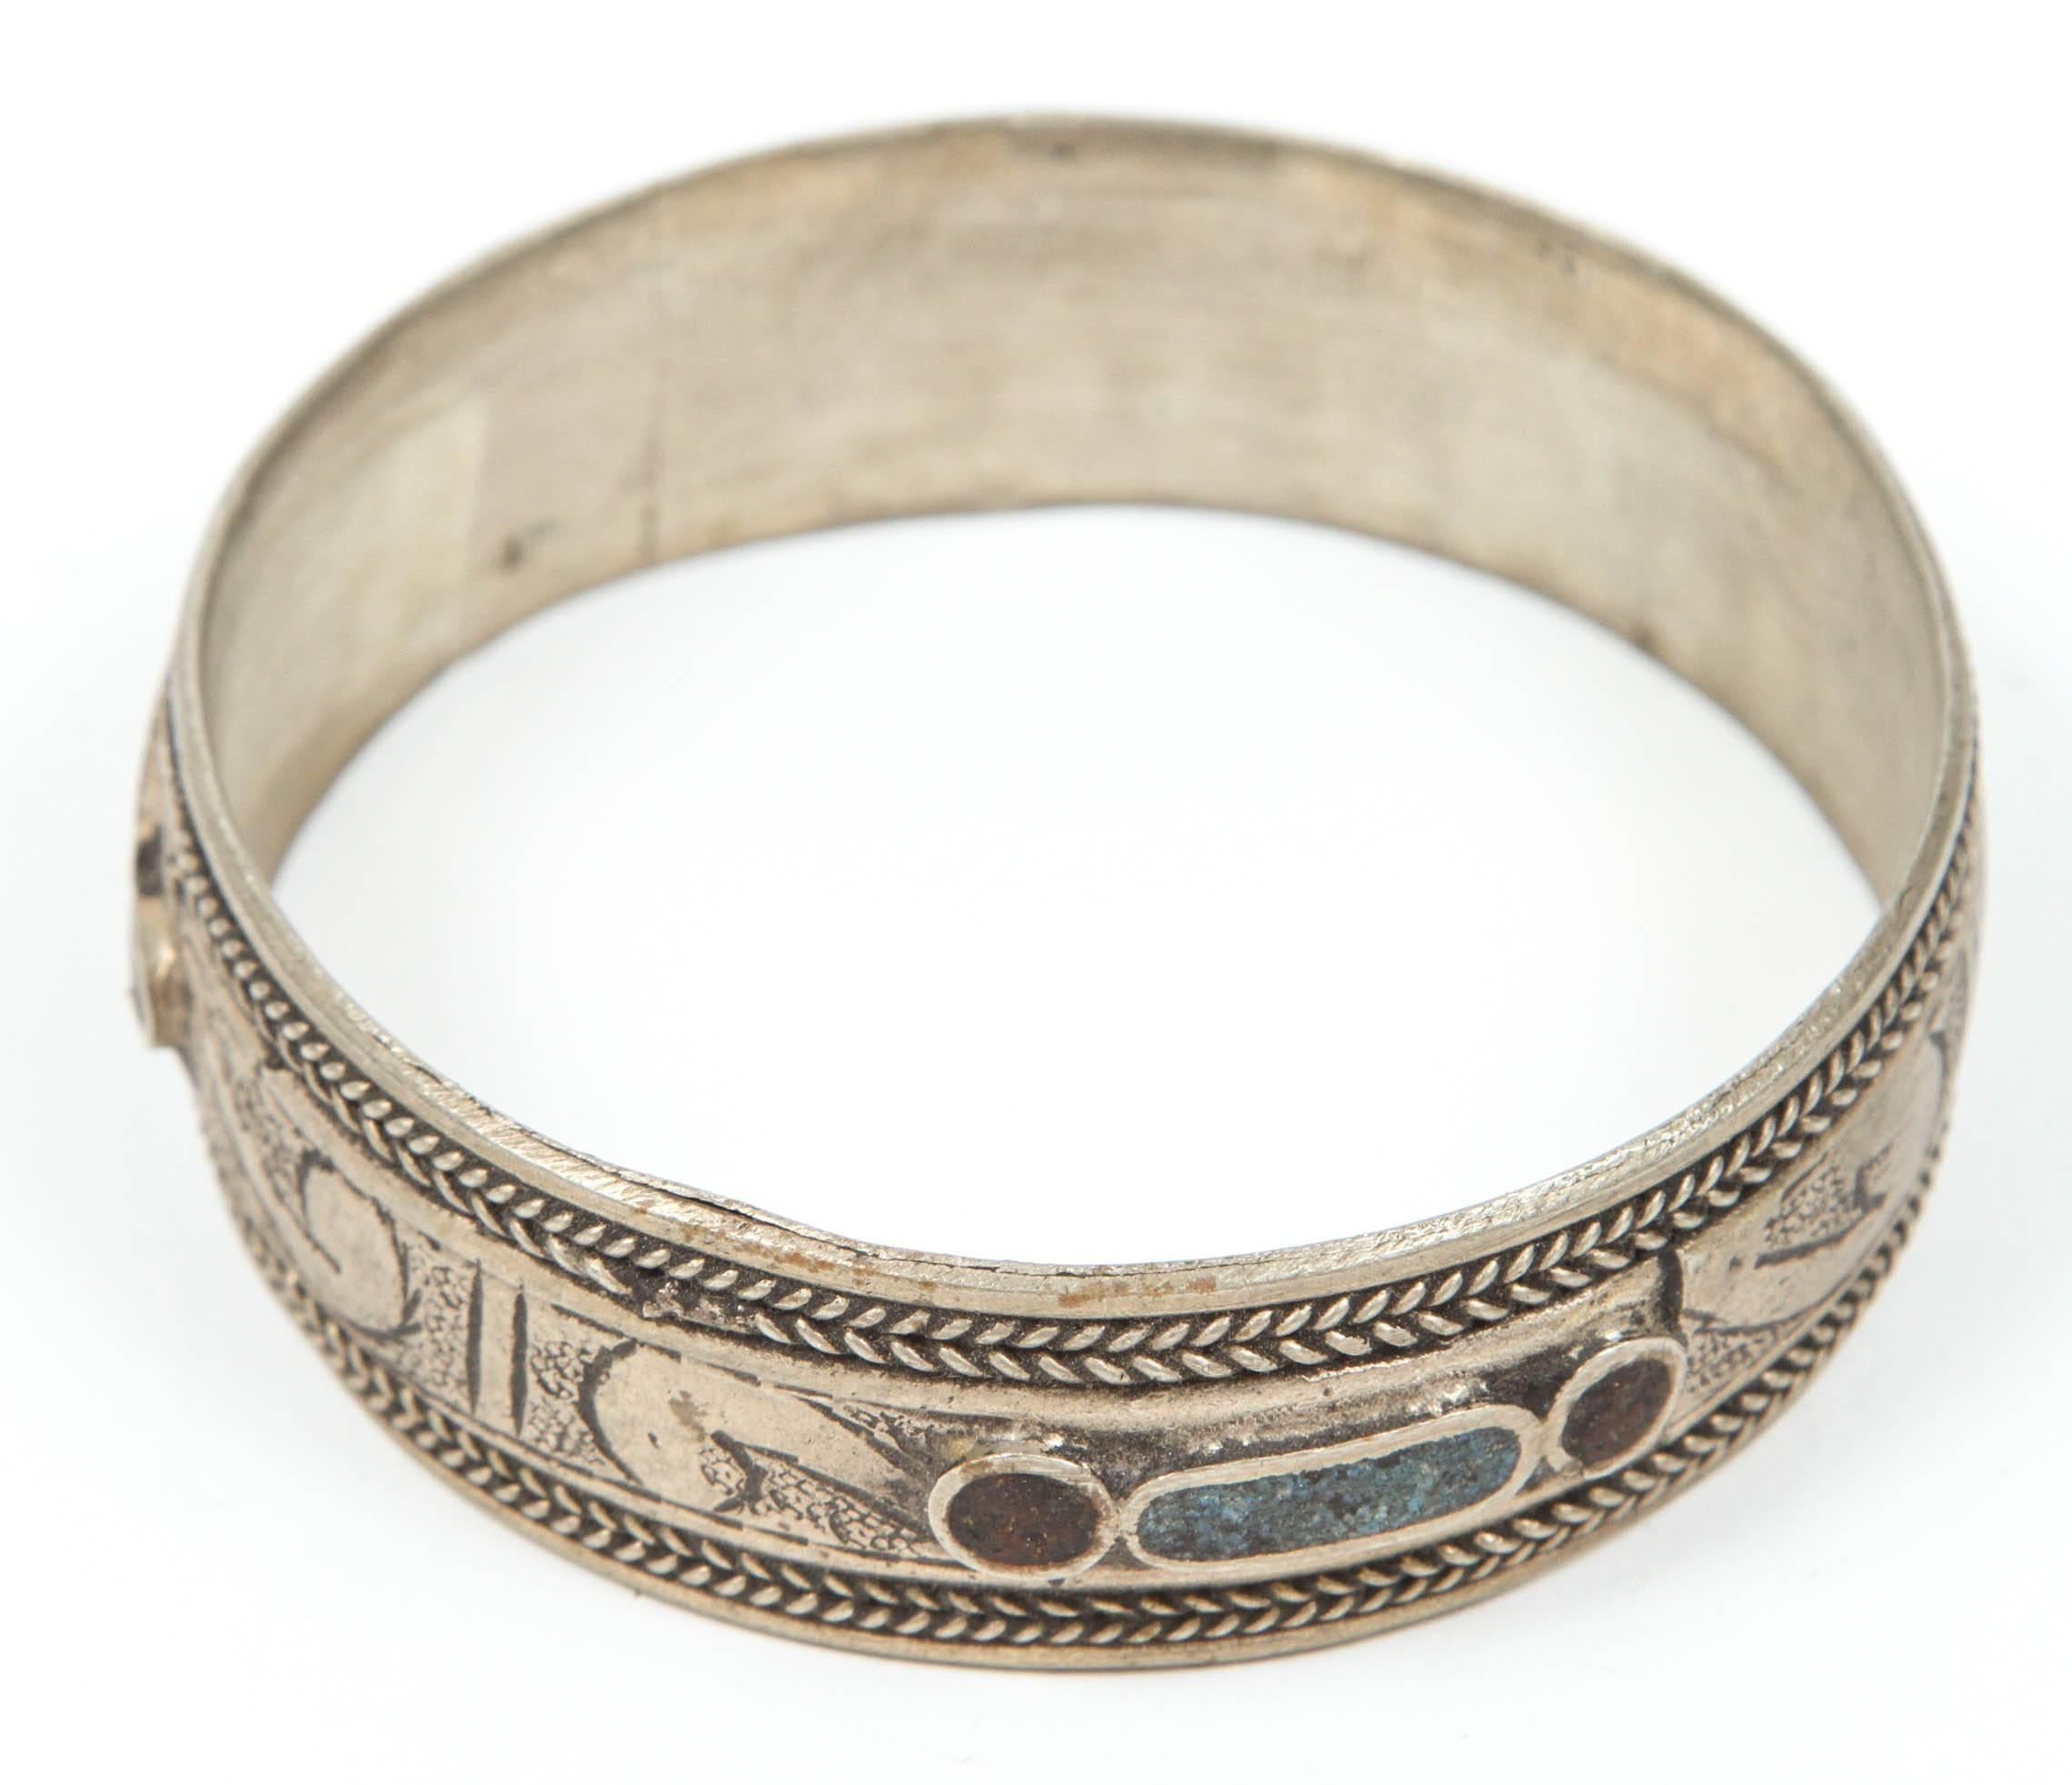 Moroccan Berber tribal bracelet Moroccan tribal bracelet, cuff from the high atlas of Morocco. 
Handcrafted by Berber women using Moroccan silver nickel. 
The ethnic Nomadic and Bedouin jewelry from the Maghreb and North Africa is usually made of